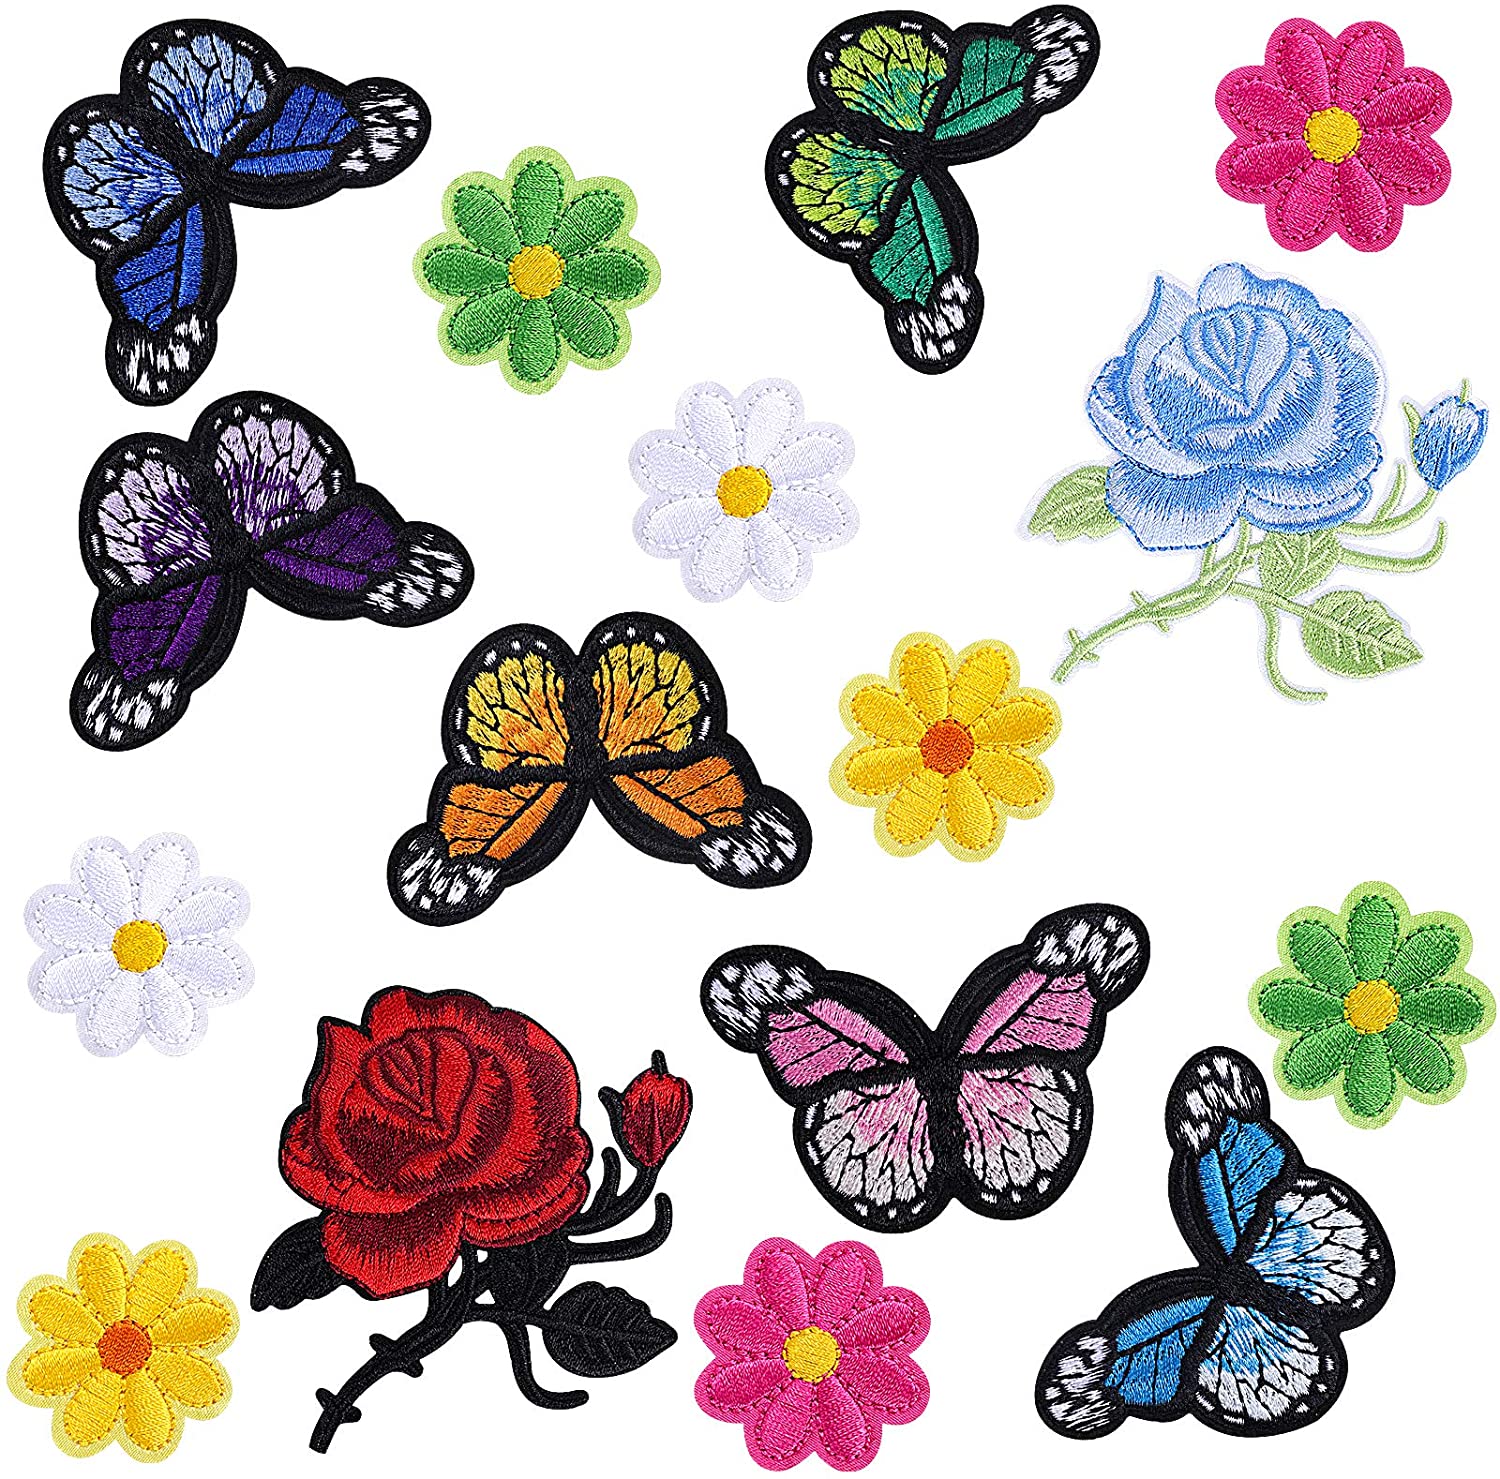 Hats,　Sticker　on　16　Iron　Pieces　Sew-on　Stickers　Flower　Patch,　Embroidery　Embroidery　Repair　Iron-on　Butterfly　Patches　Clothing,　Patch　for　Backpacks,　Jeans,　and　Decoration，JUN